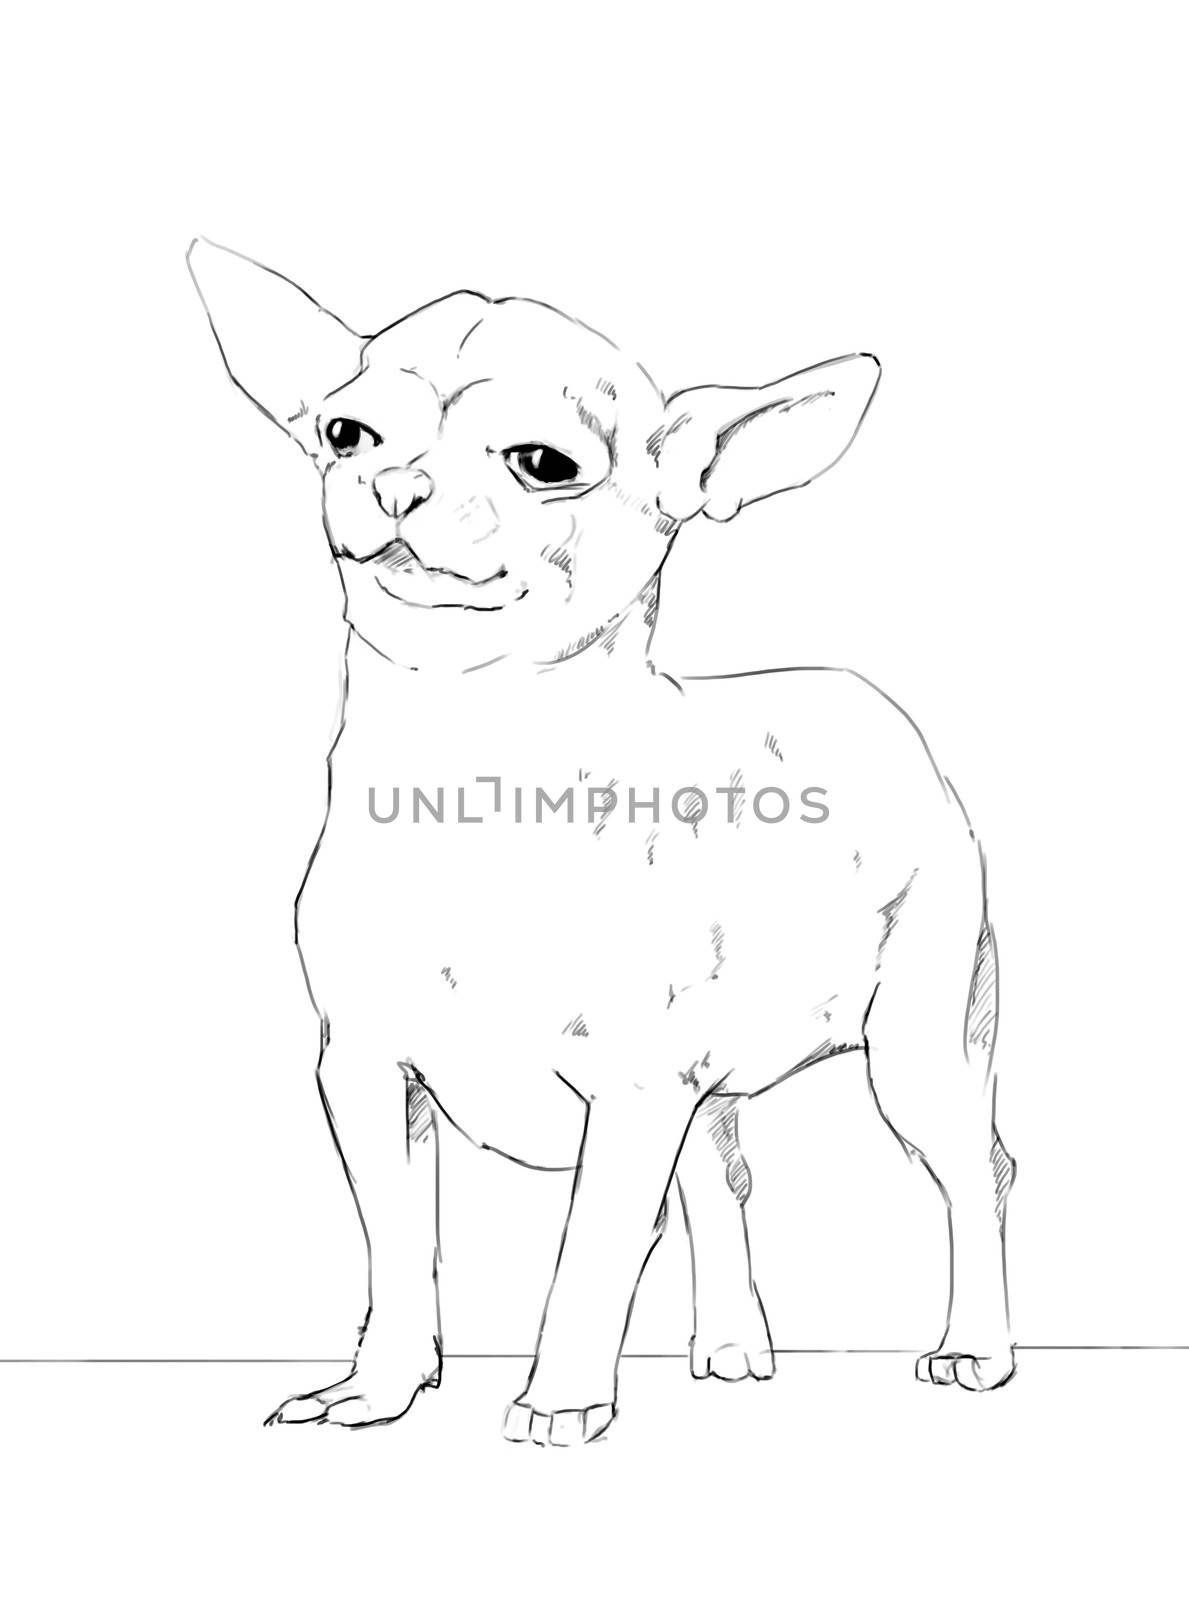 chihuahua is a brave small dog, pencil drawing